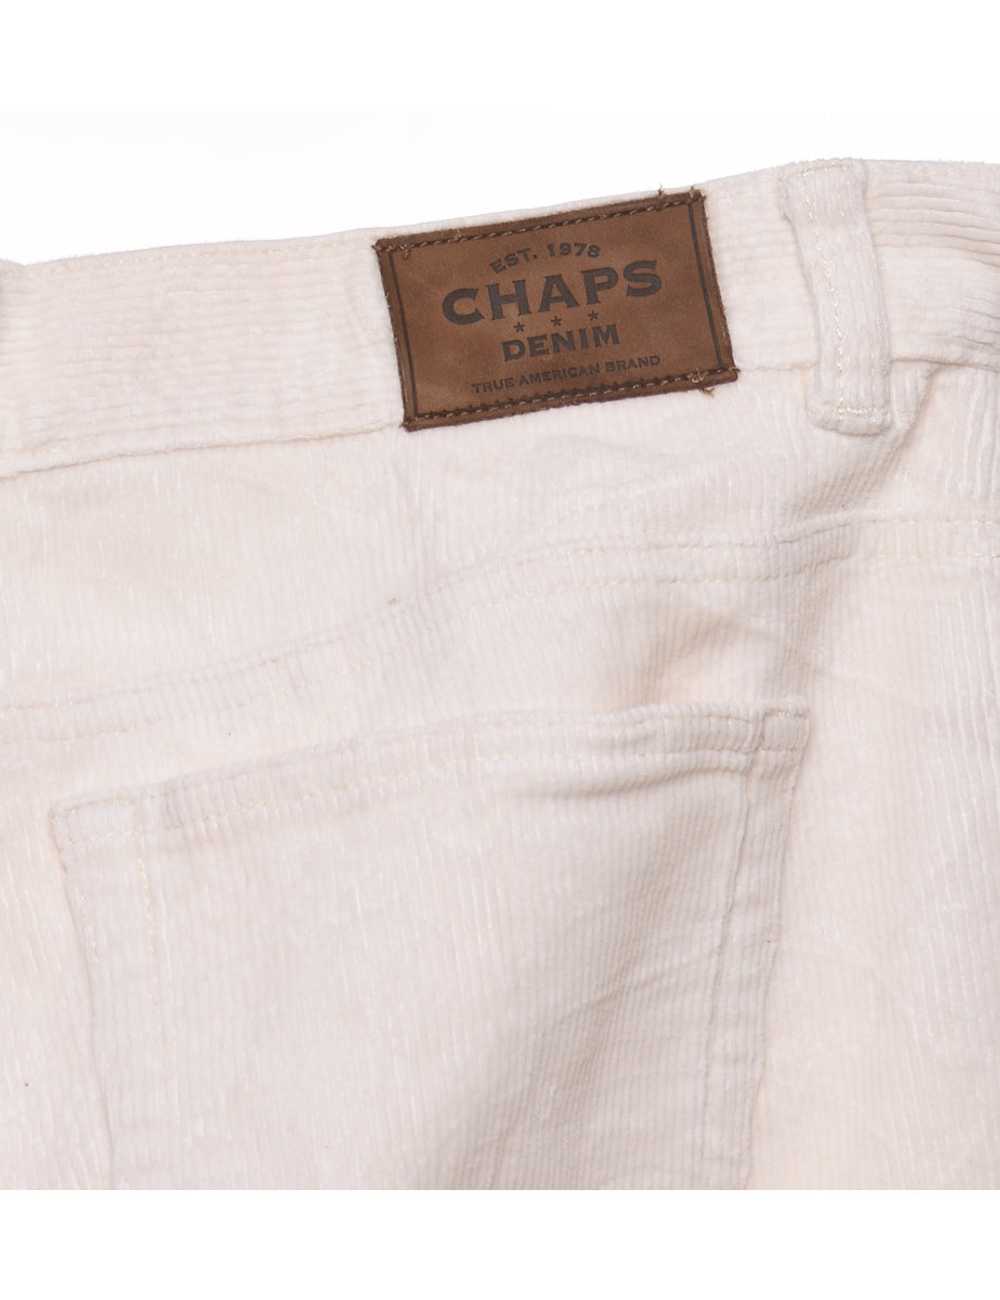 Chaps Off-White 1990s Corduroy Trousers - W31 L28 - image 4